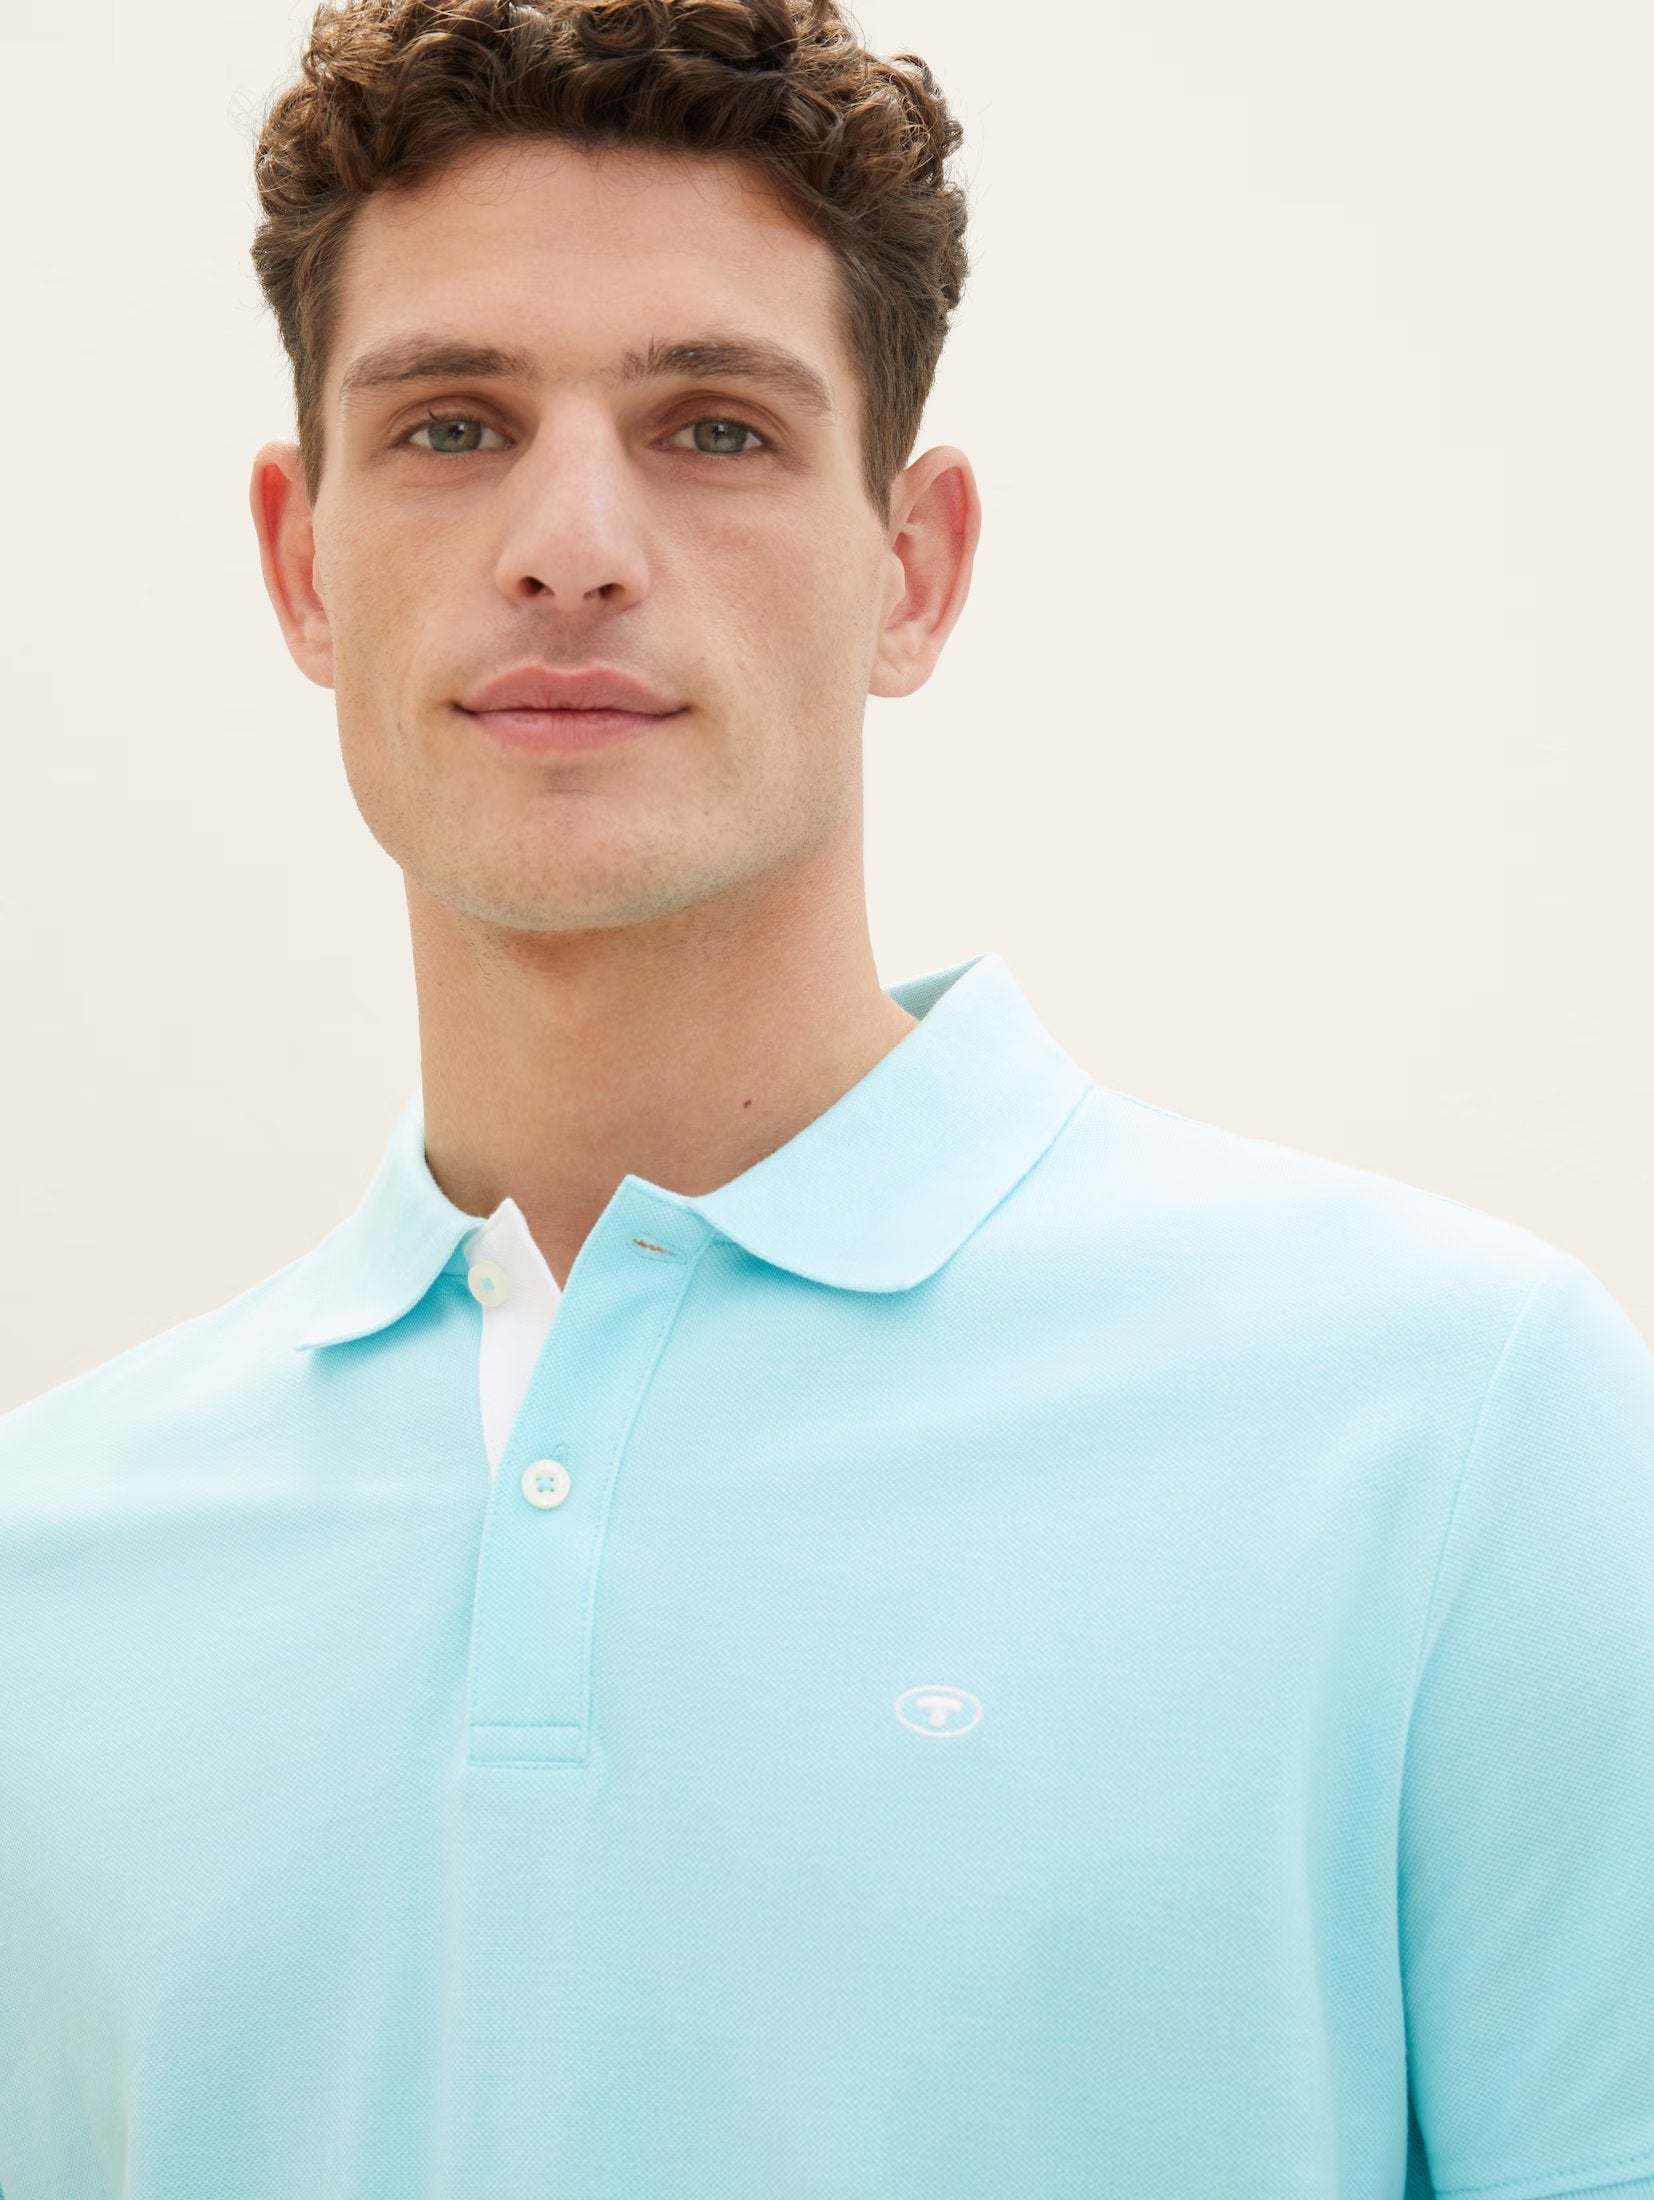 Tom Tailor Men Casual Turquoise  Polo